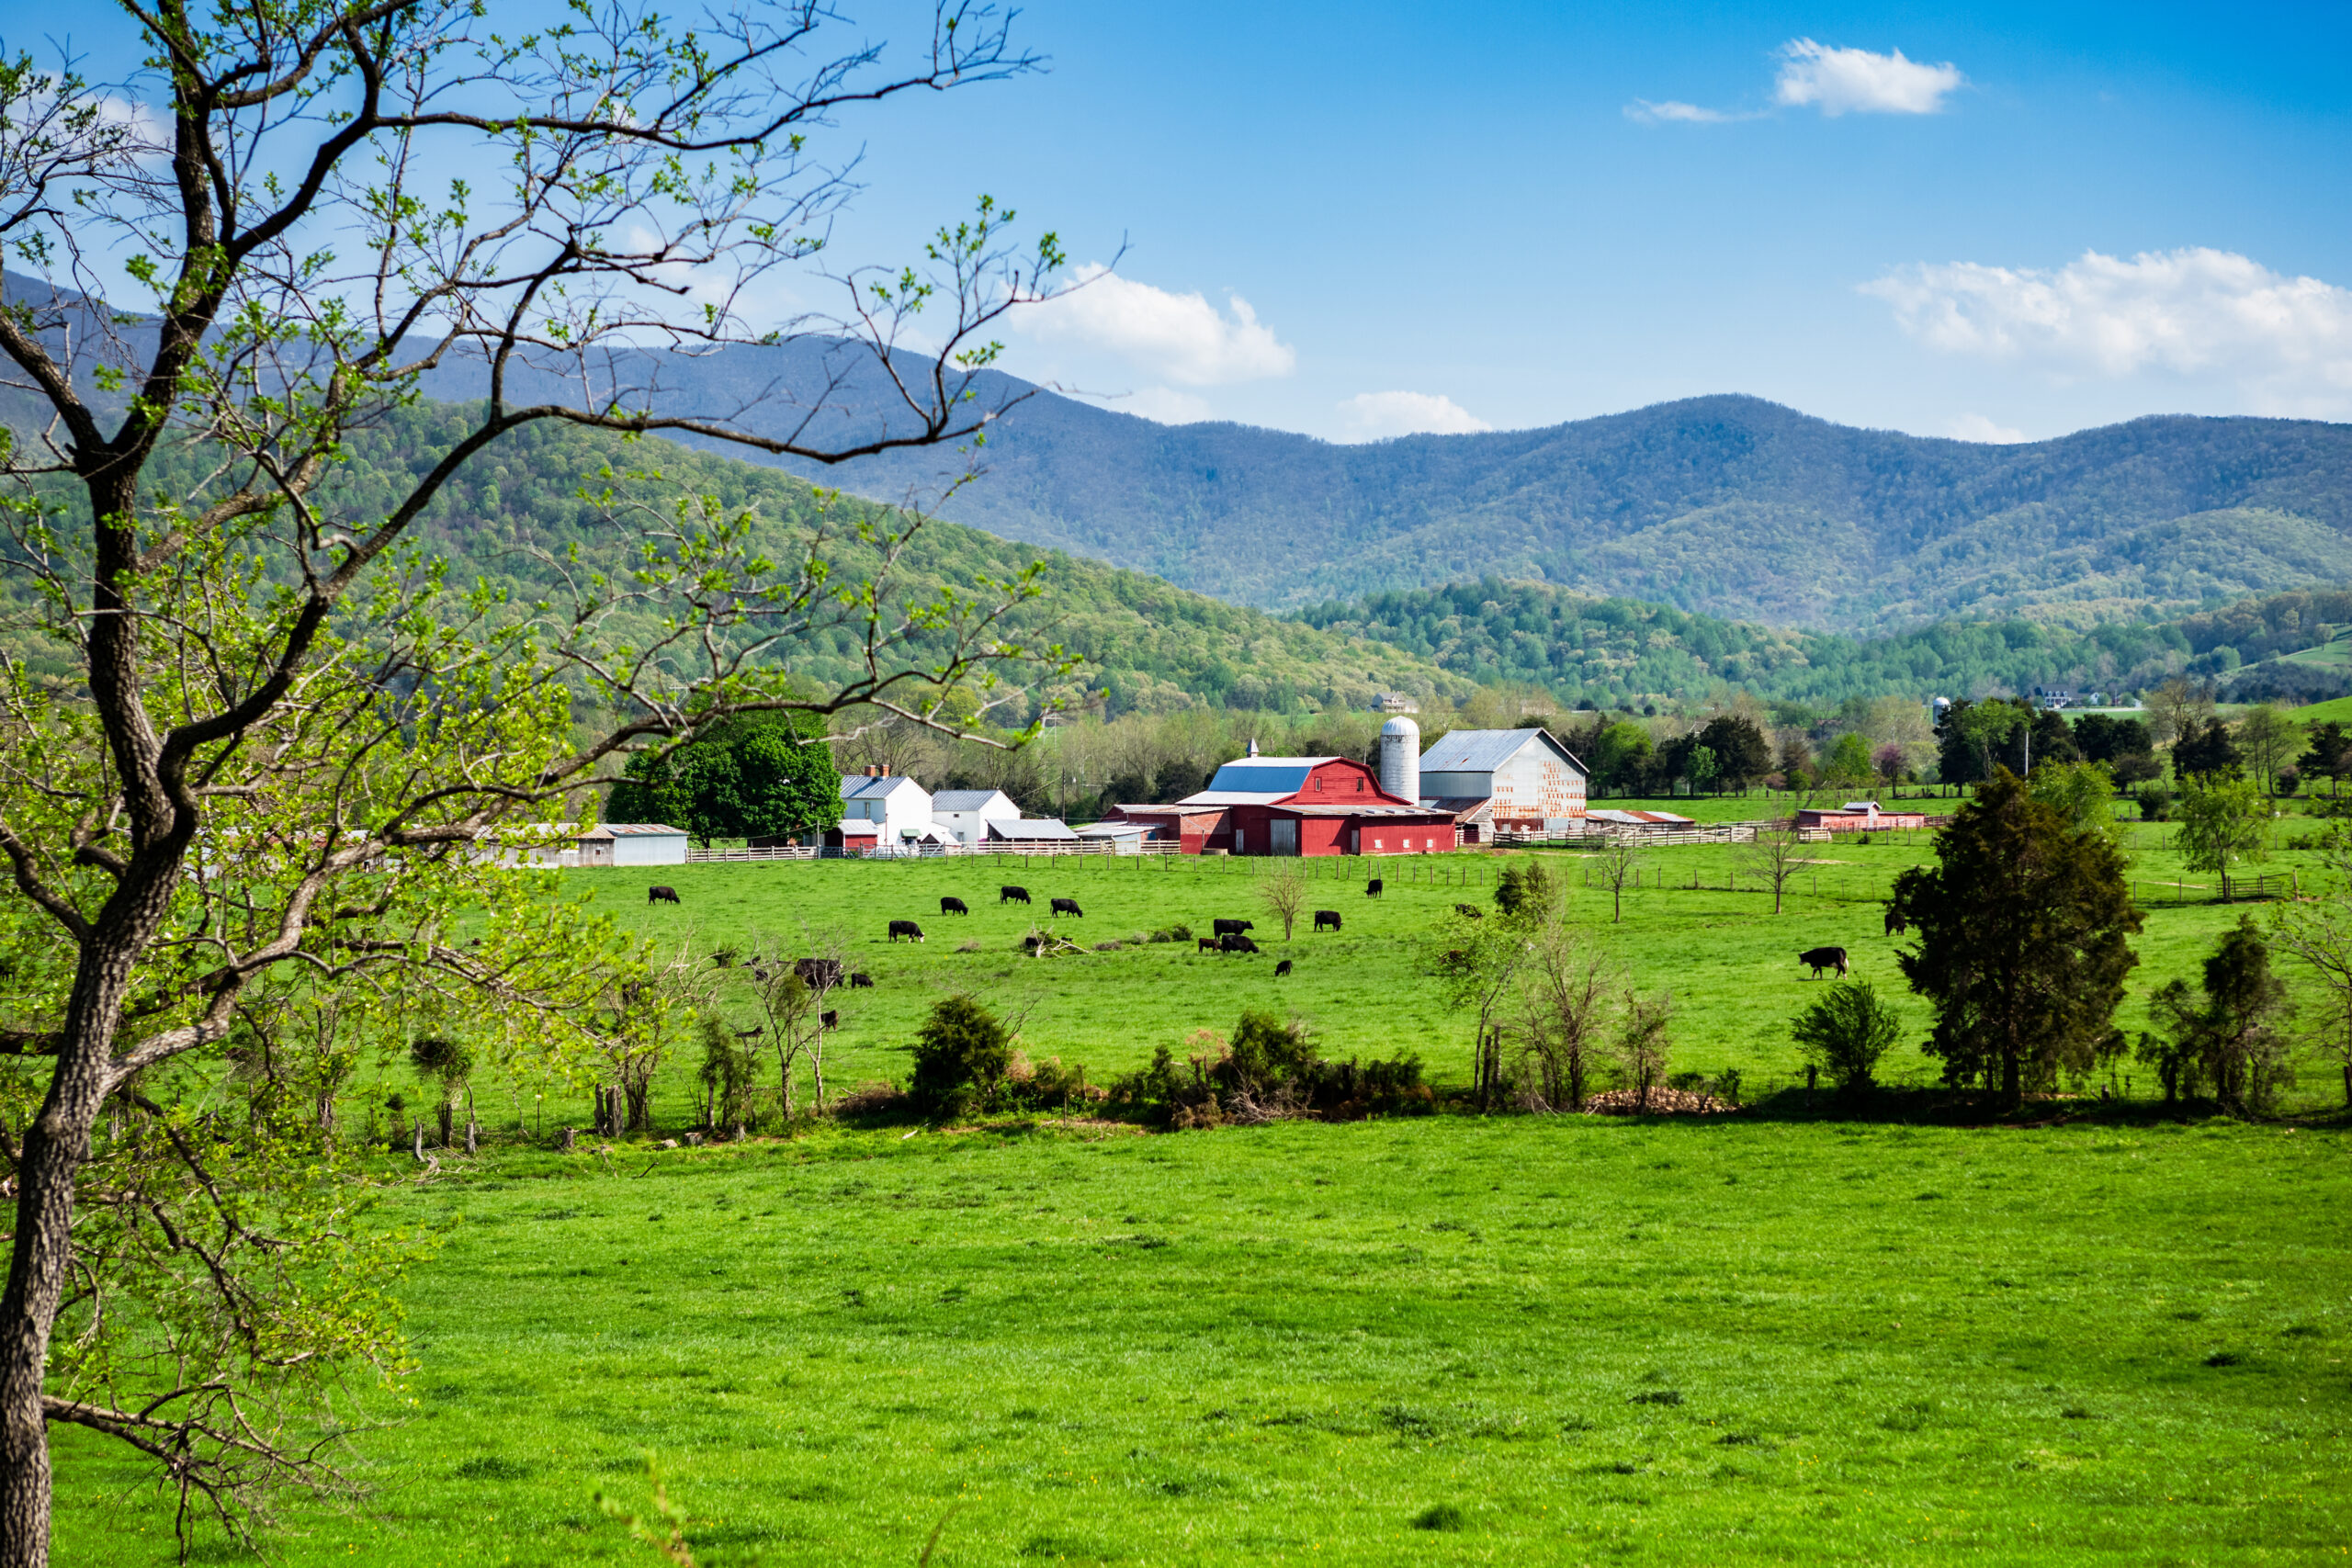 Farmland with cattle in rural Luray Virginia in the mountains